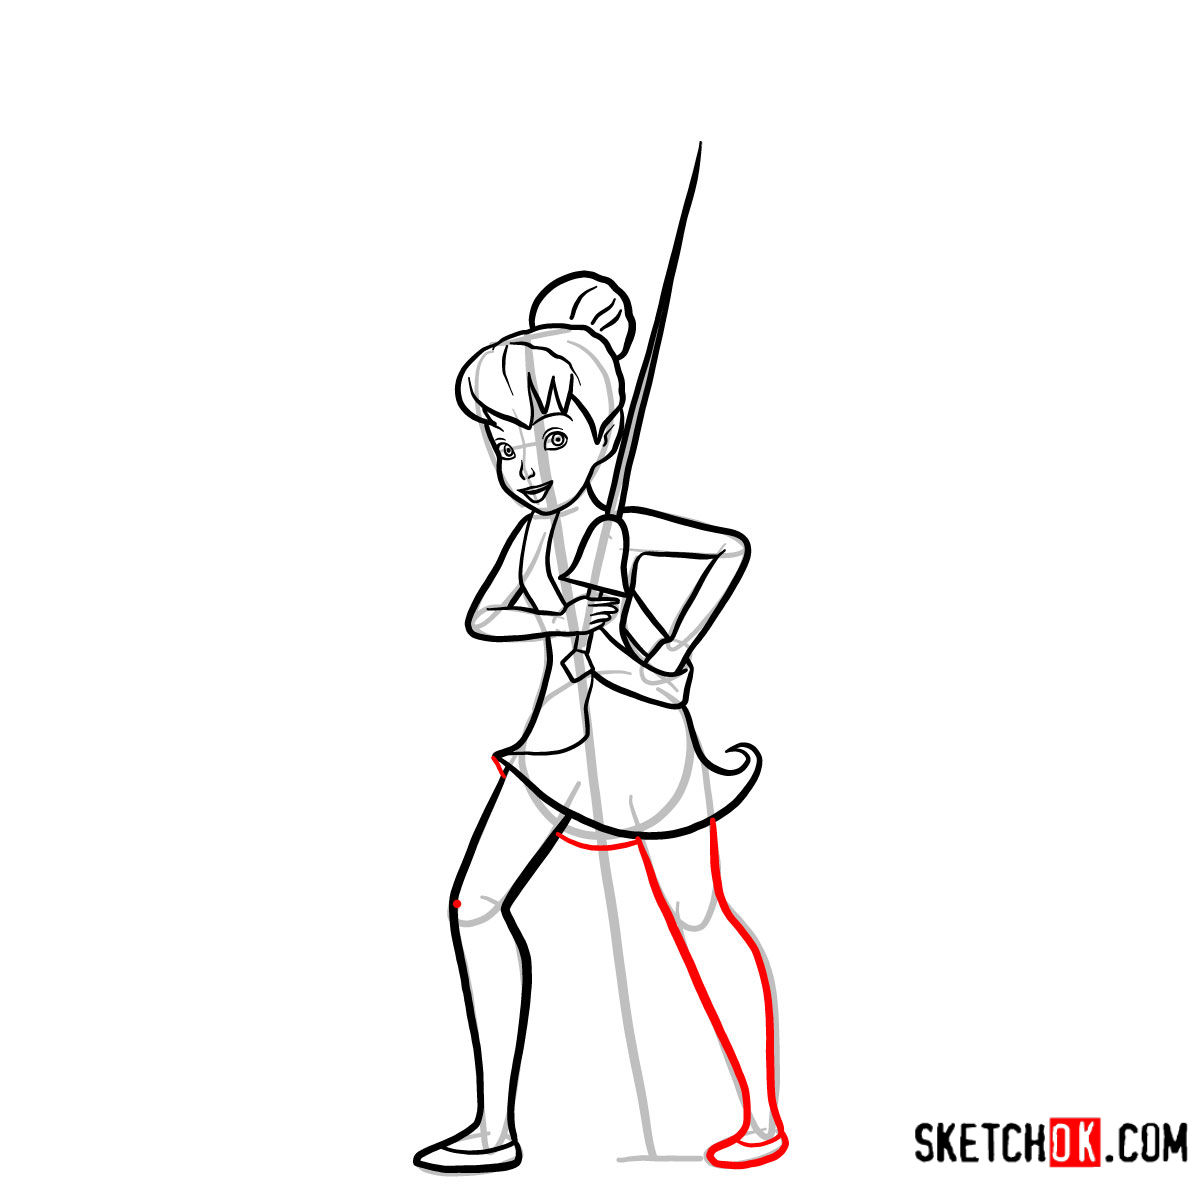 How to draw Tinker Bell the pirate | Disney Fairies - step 11